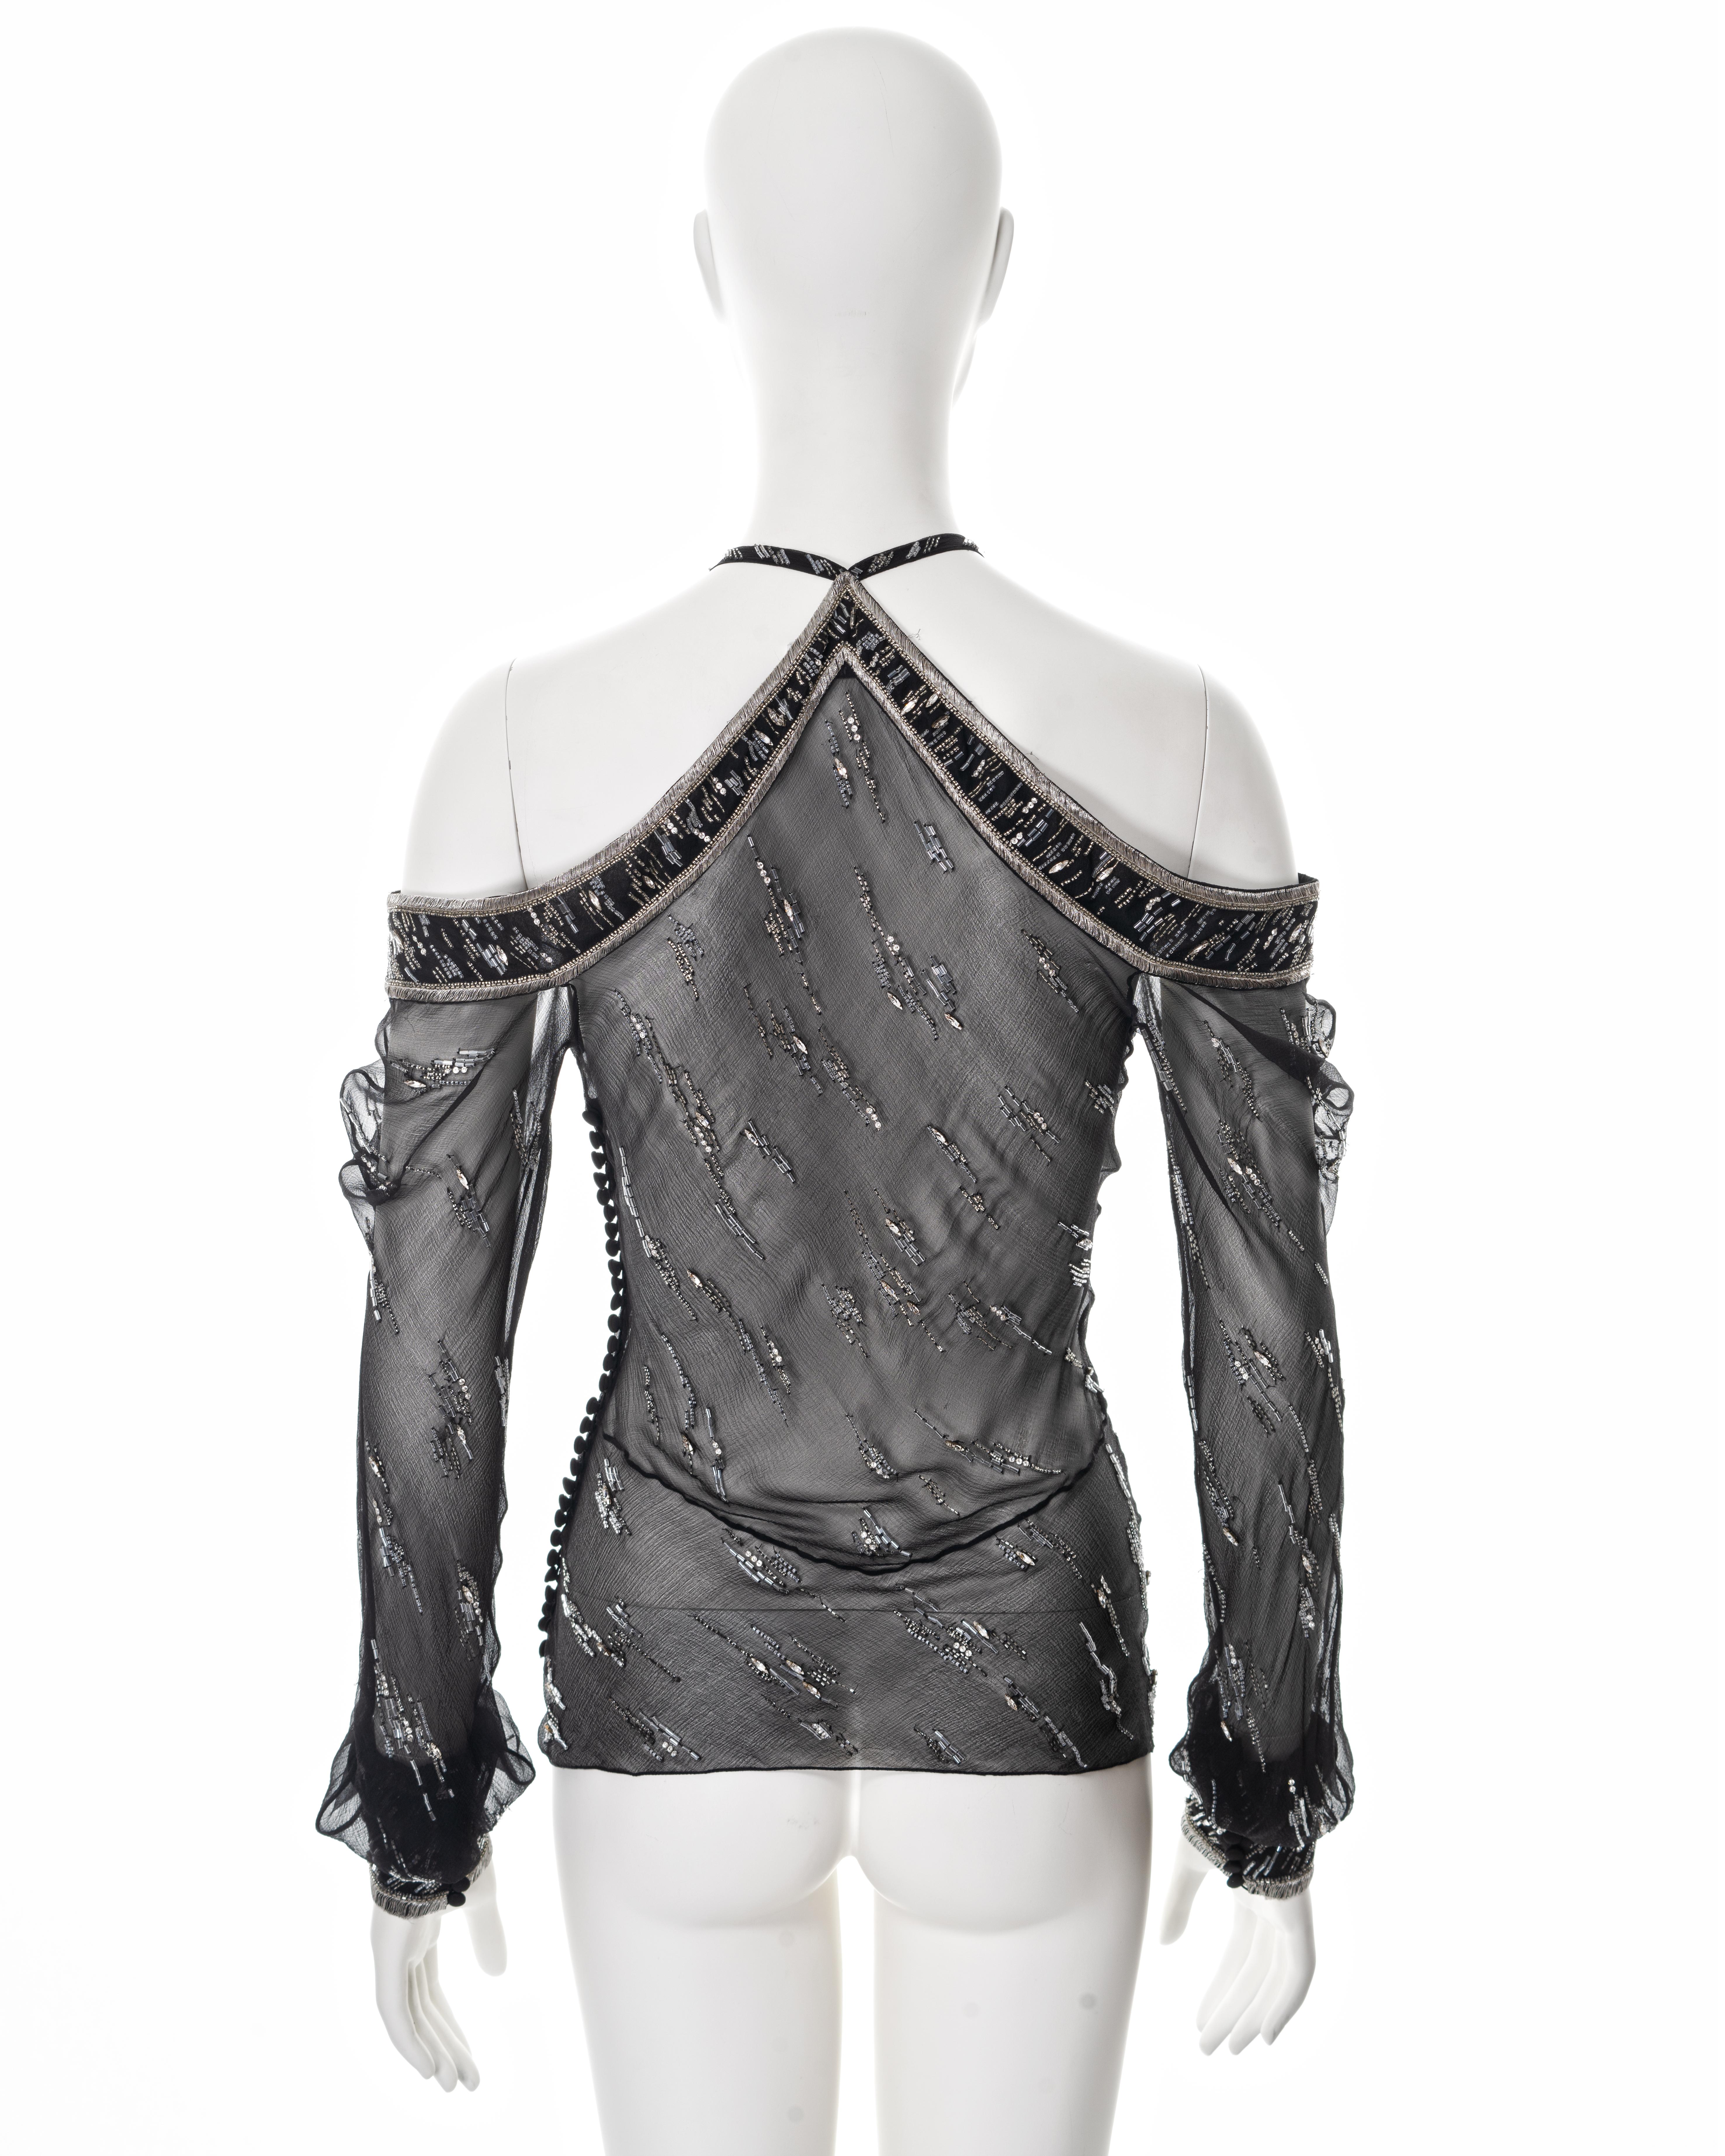 Christian Dior by John Galliano embellished silk evening blouse, ss 2005 6